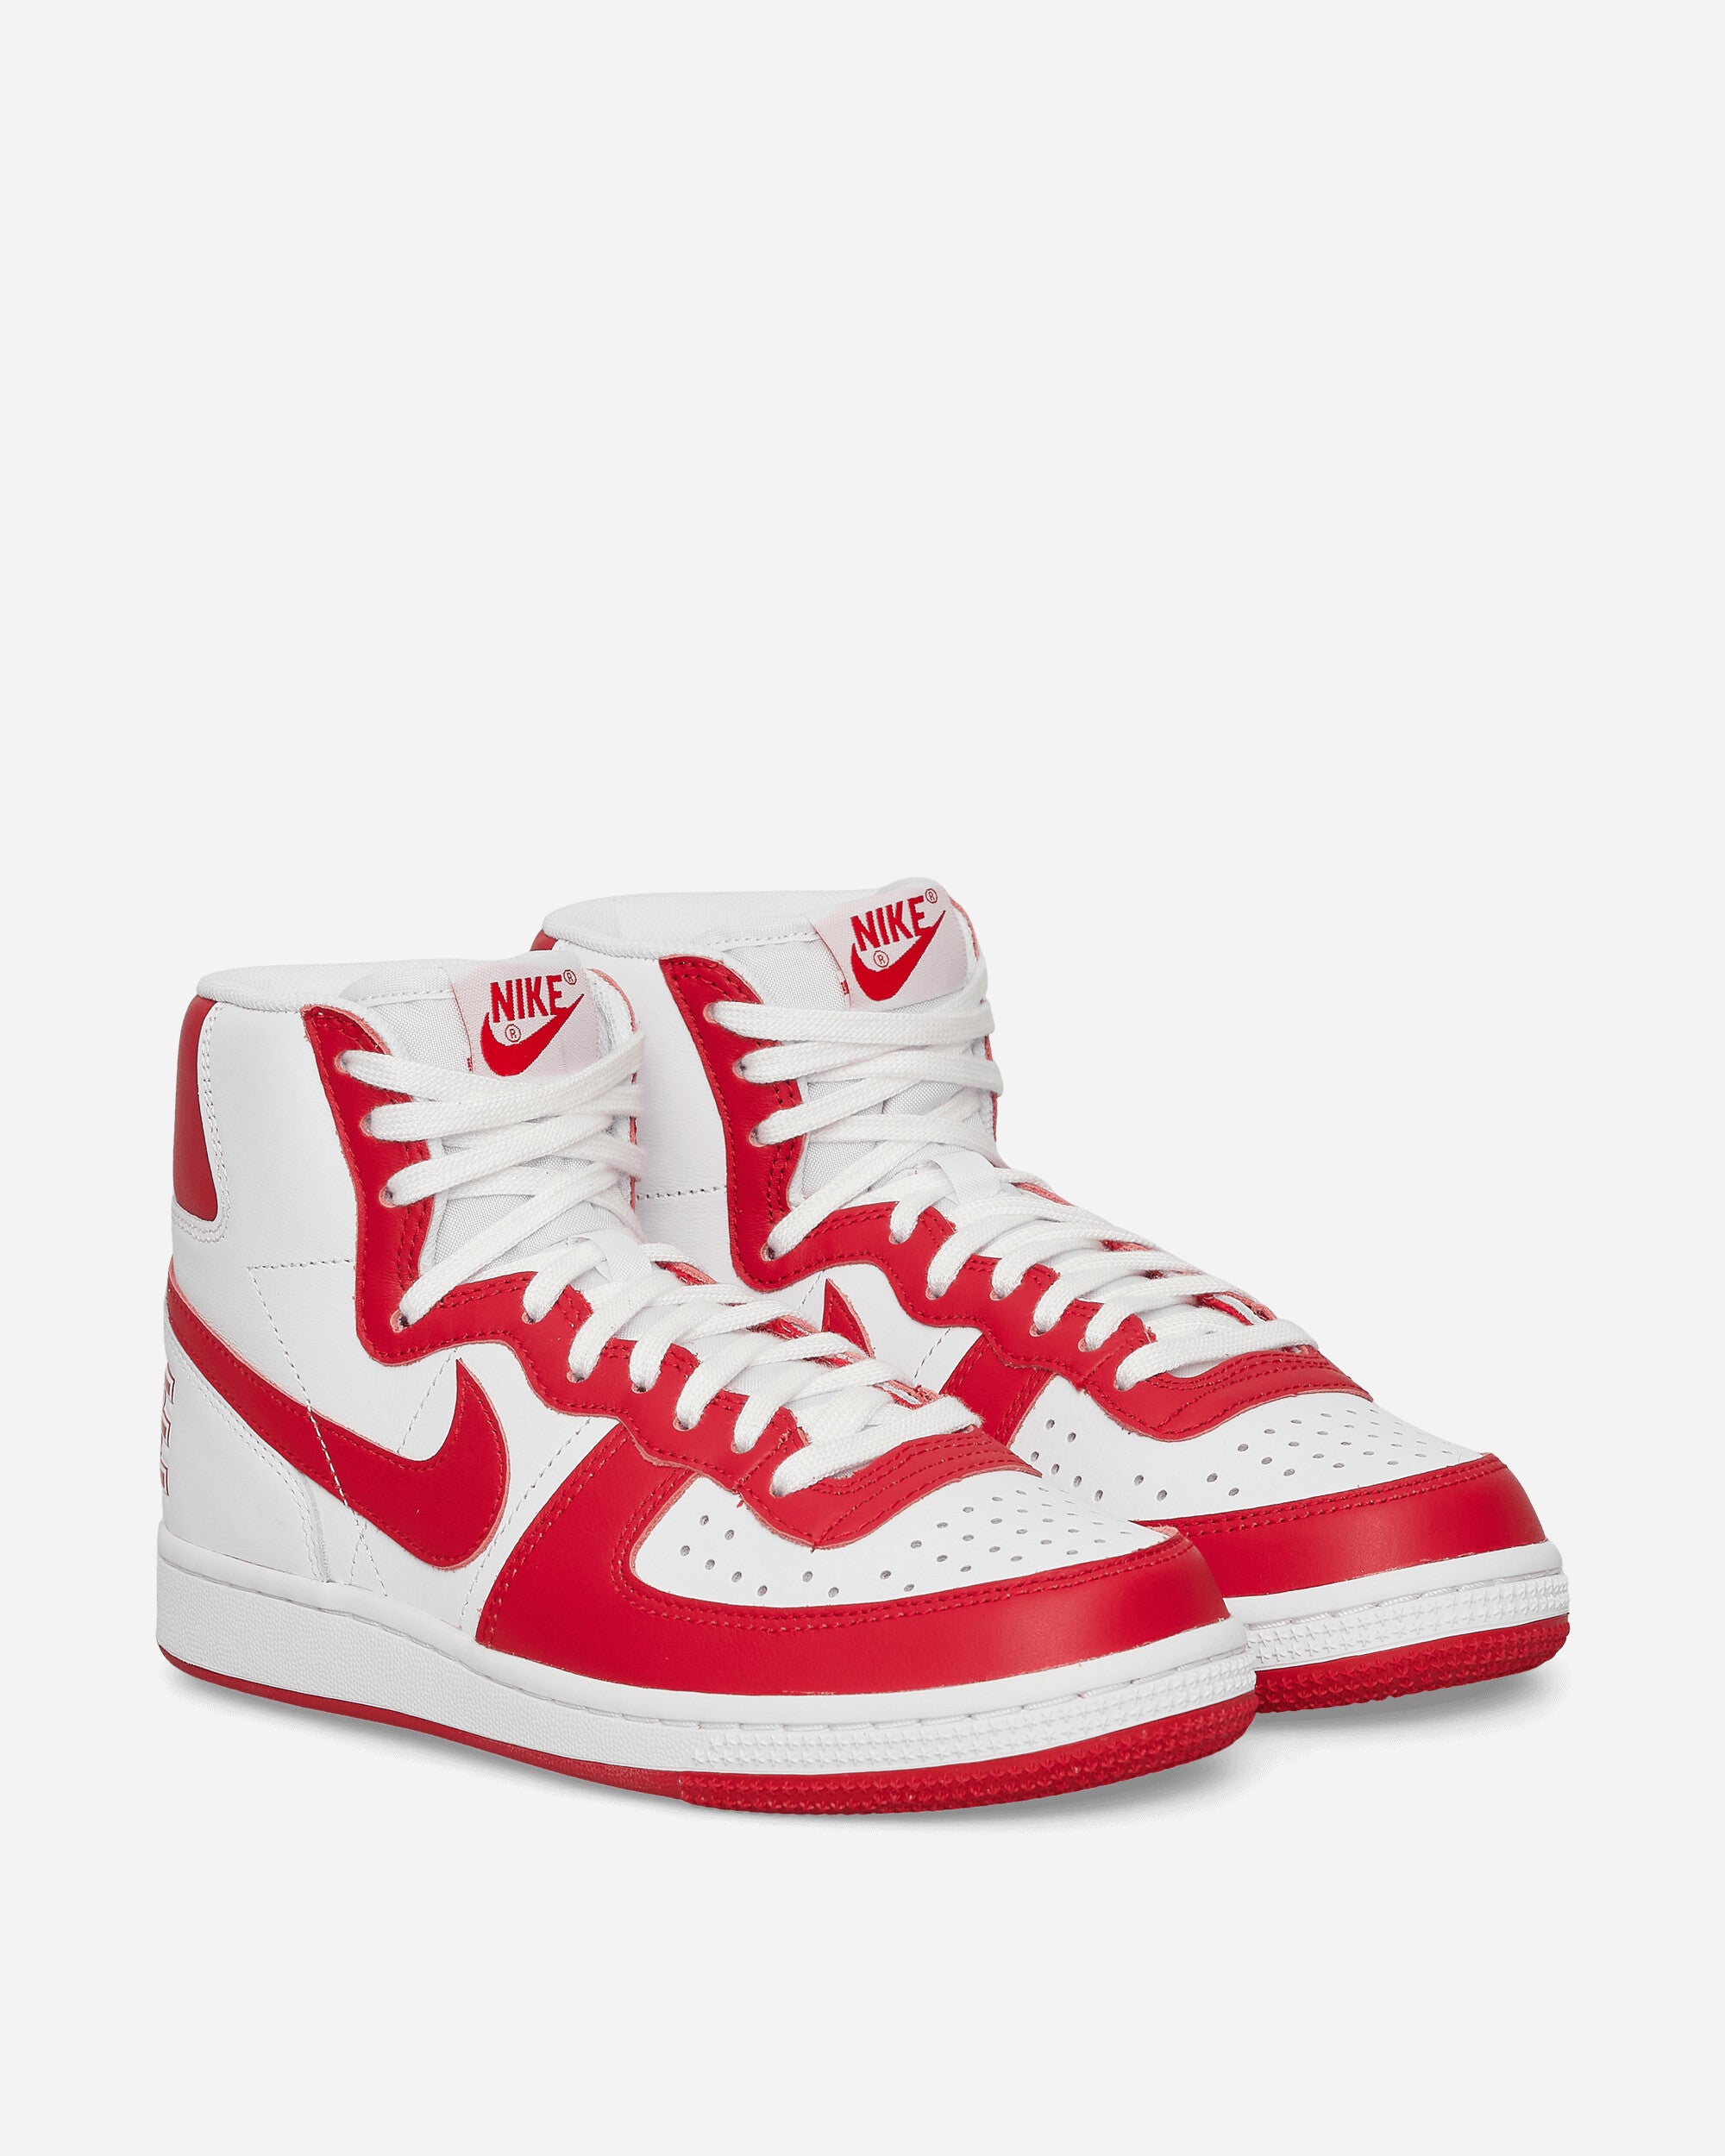 Nike High Sneakers Red - Slam Jam Official Store